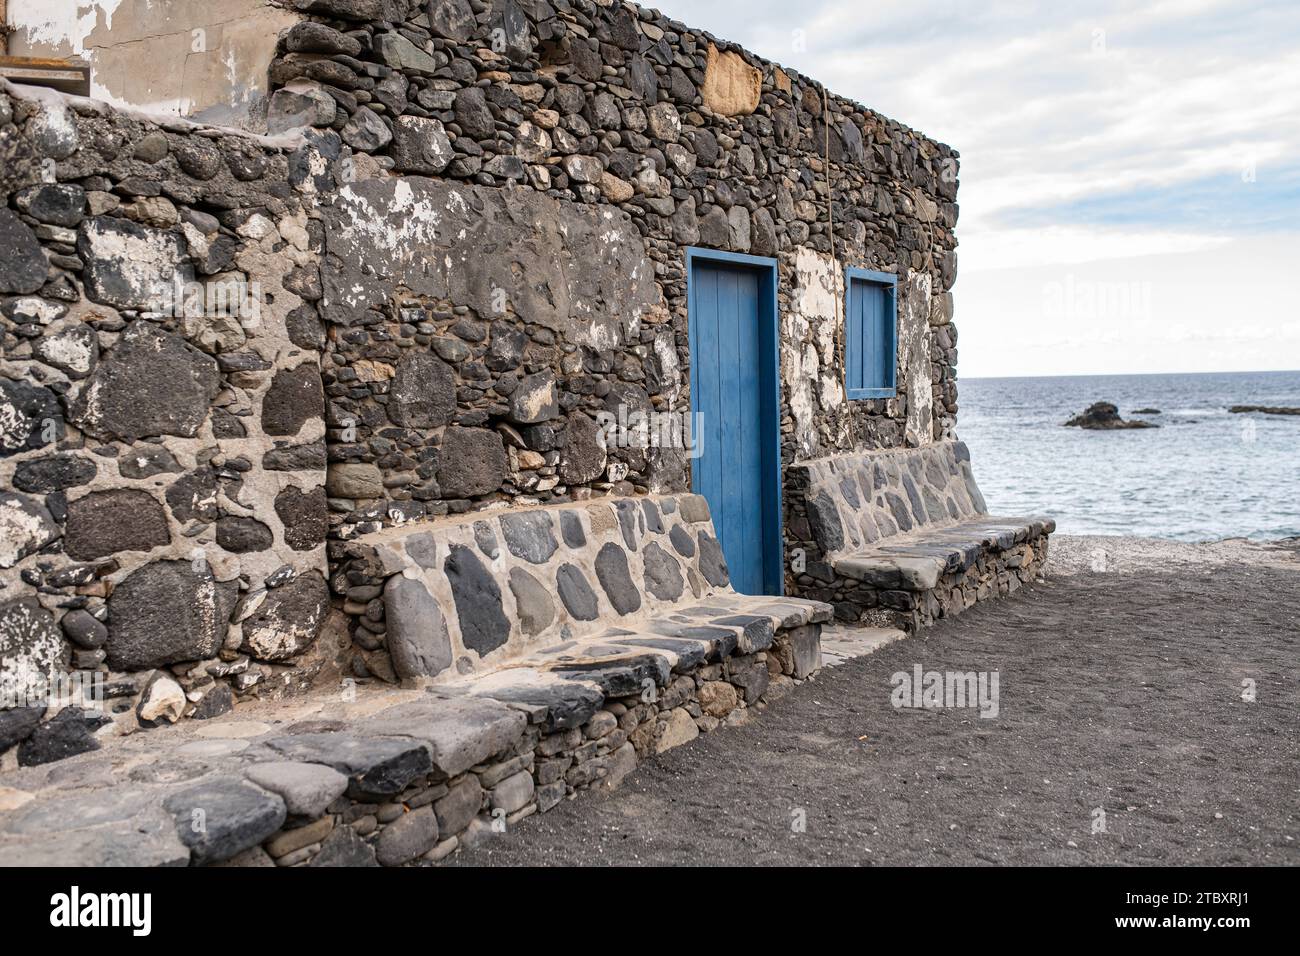 A house with blue doors and stone benches with a view on the ocean. Fuerteventura, Canary Islands. Stock Photo